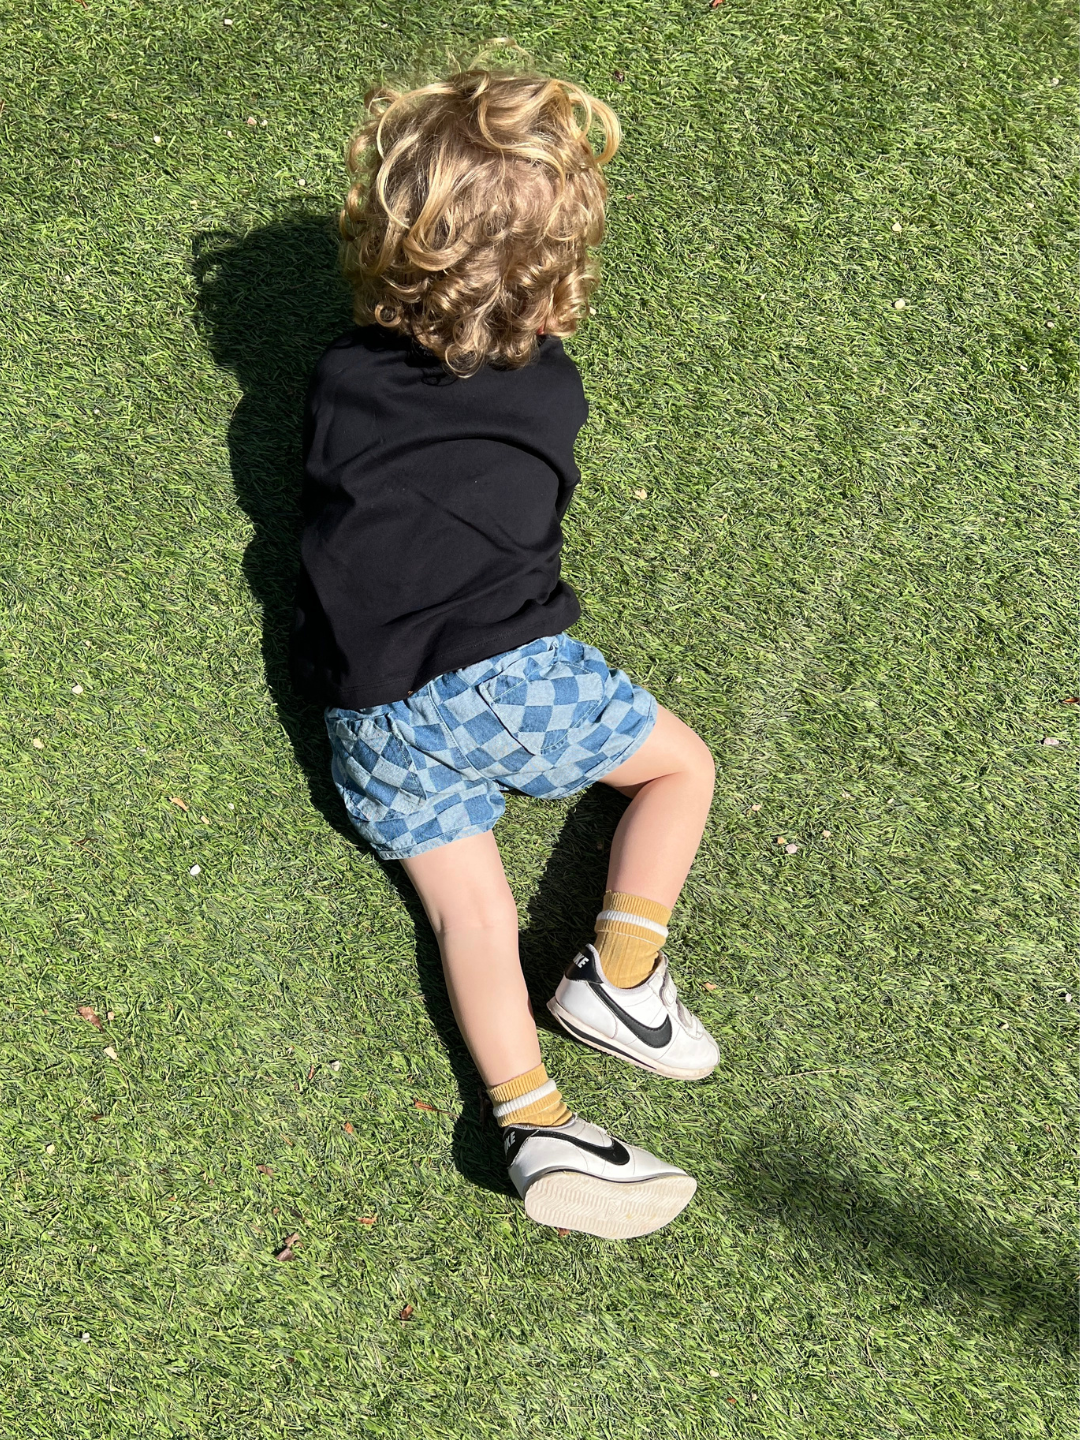 A toddler lying on grass wearing a pair of kids' checkerboard shorts in two shades of blue, back view